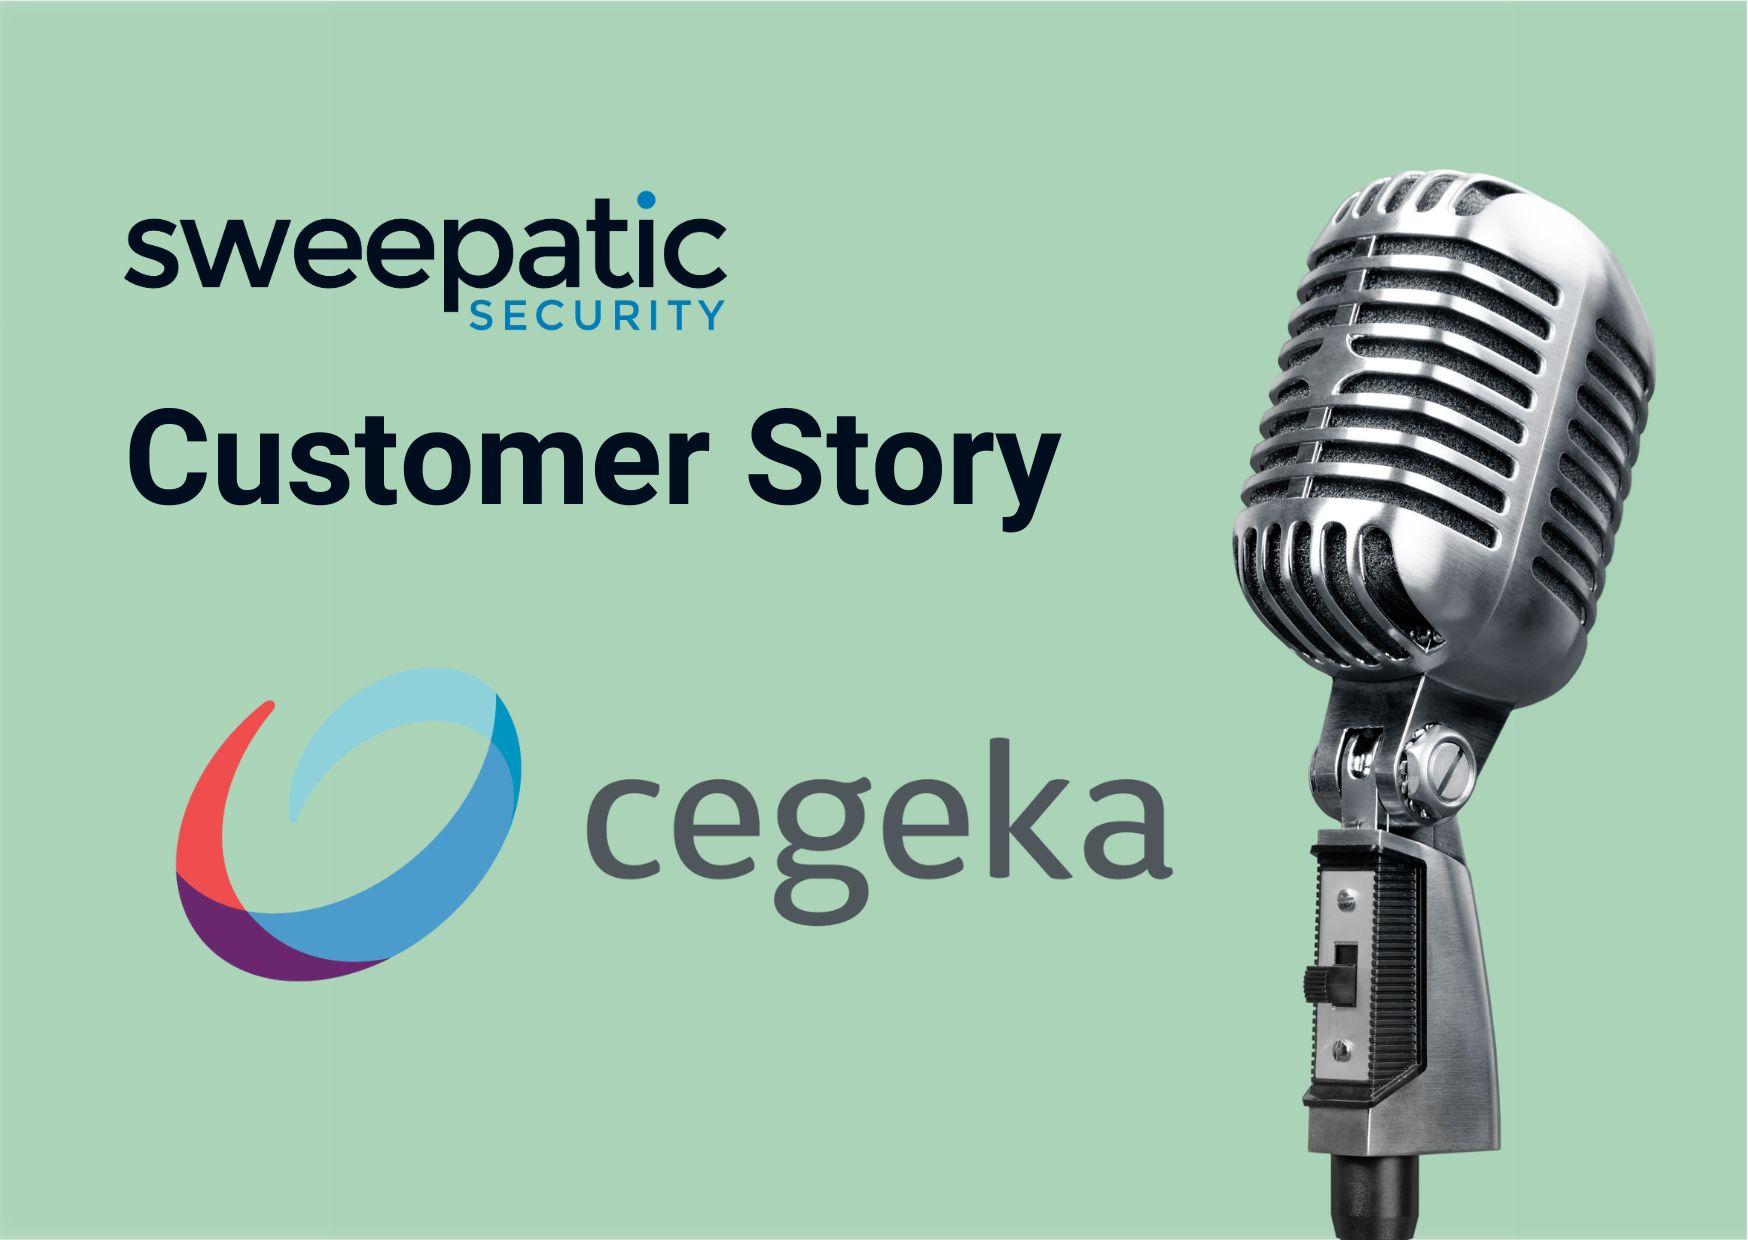 Cybersecurity in the IT sector: The Cegeka story